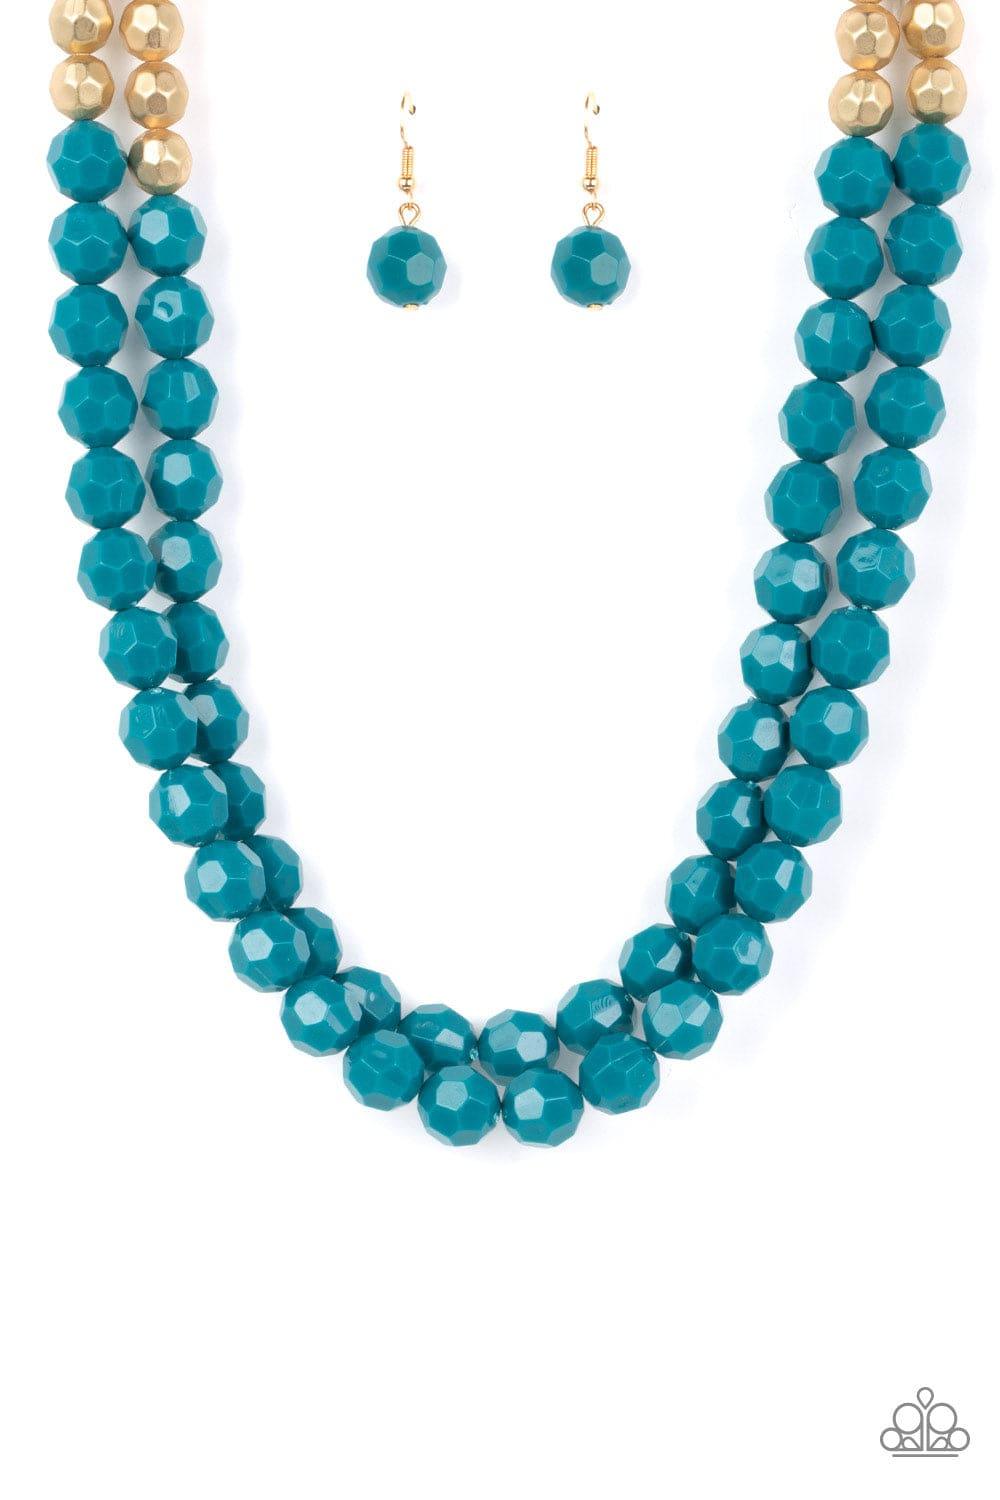 Paparazzi Accessories - Greco Getaway - Blue Necklace - Bling by JessieK